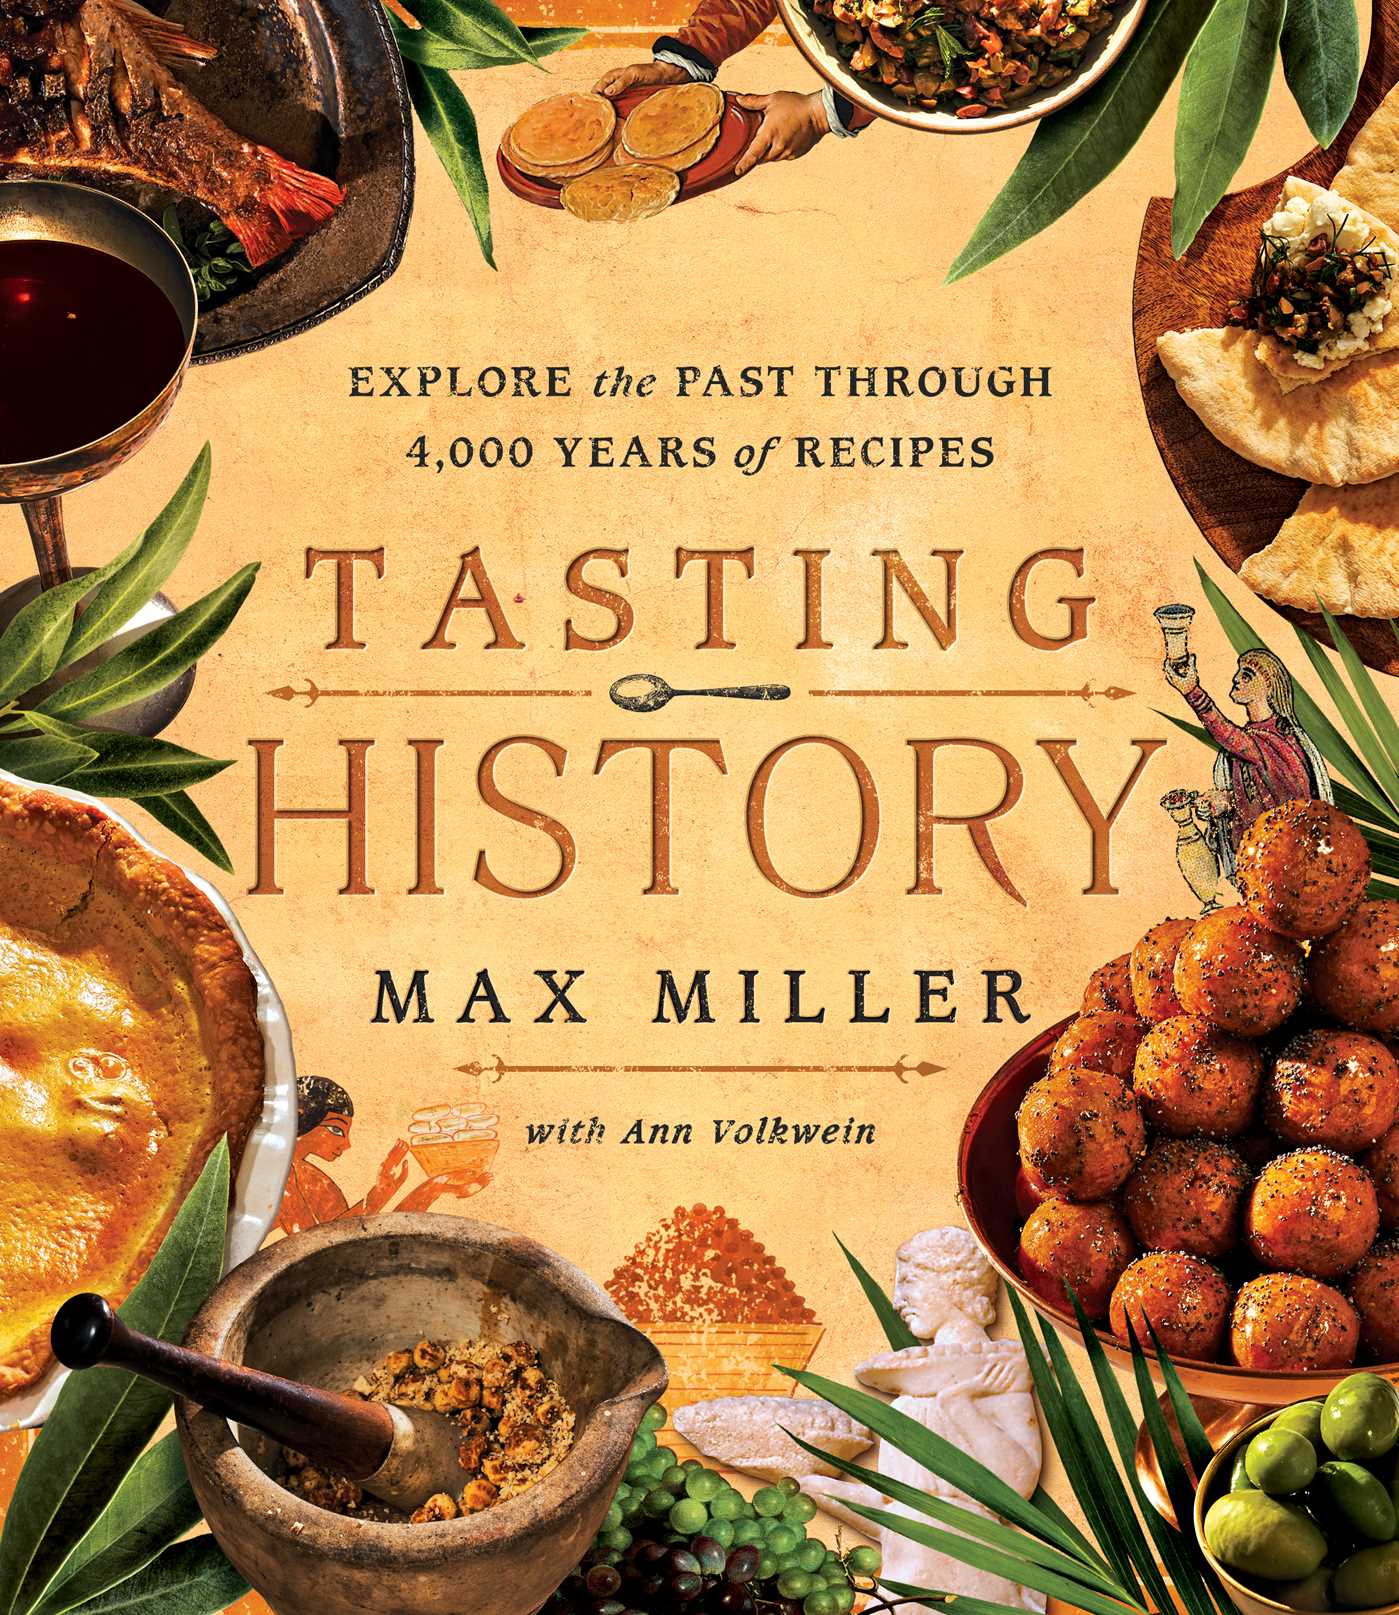 Image for "Tasting History"